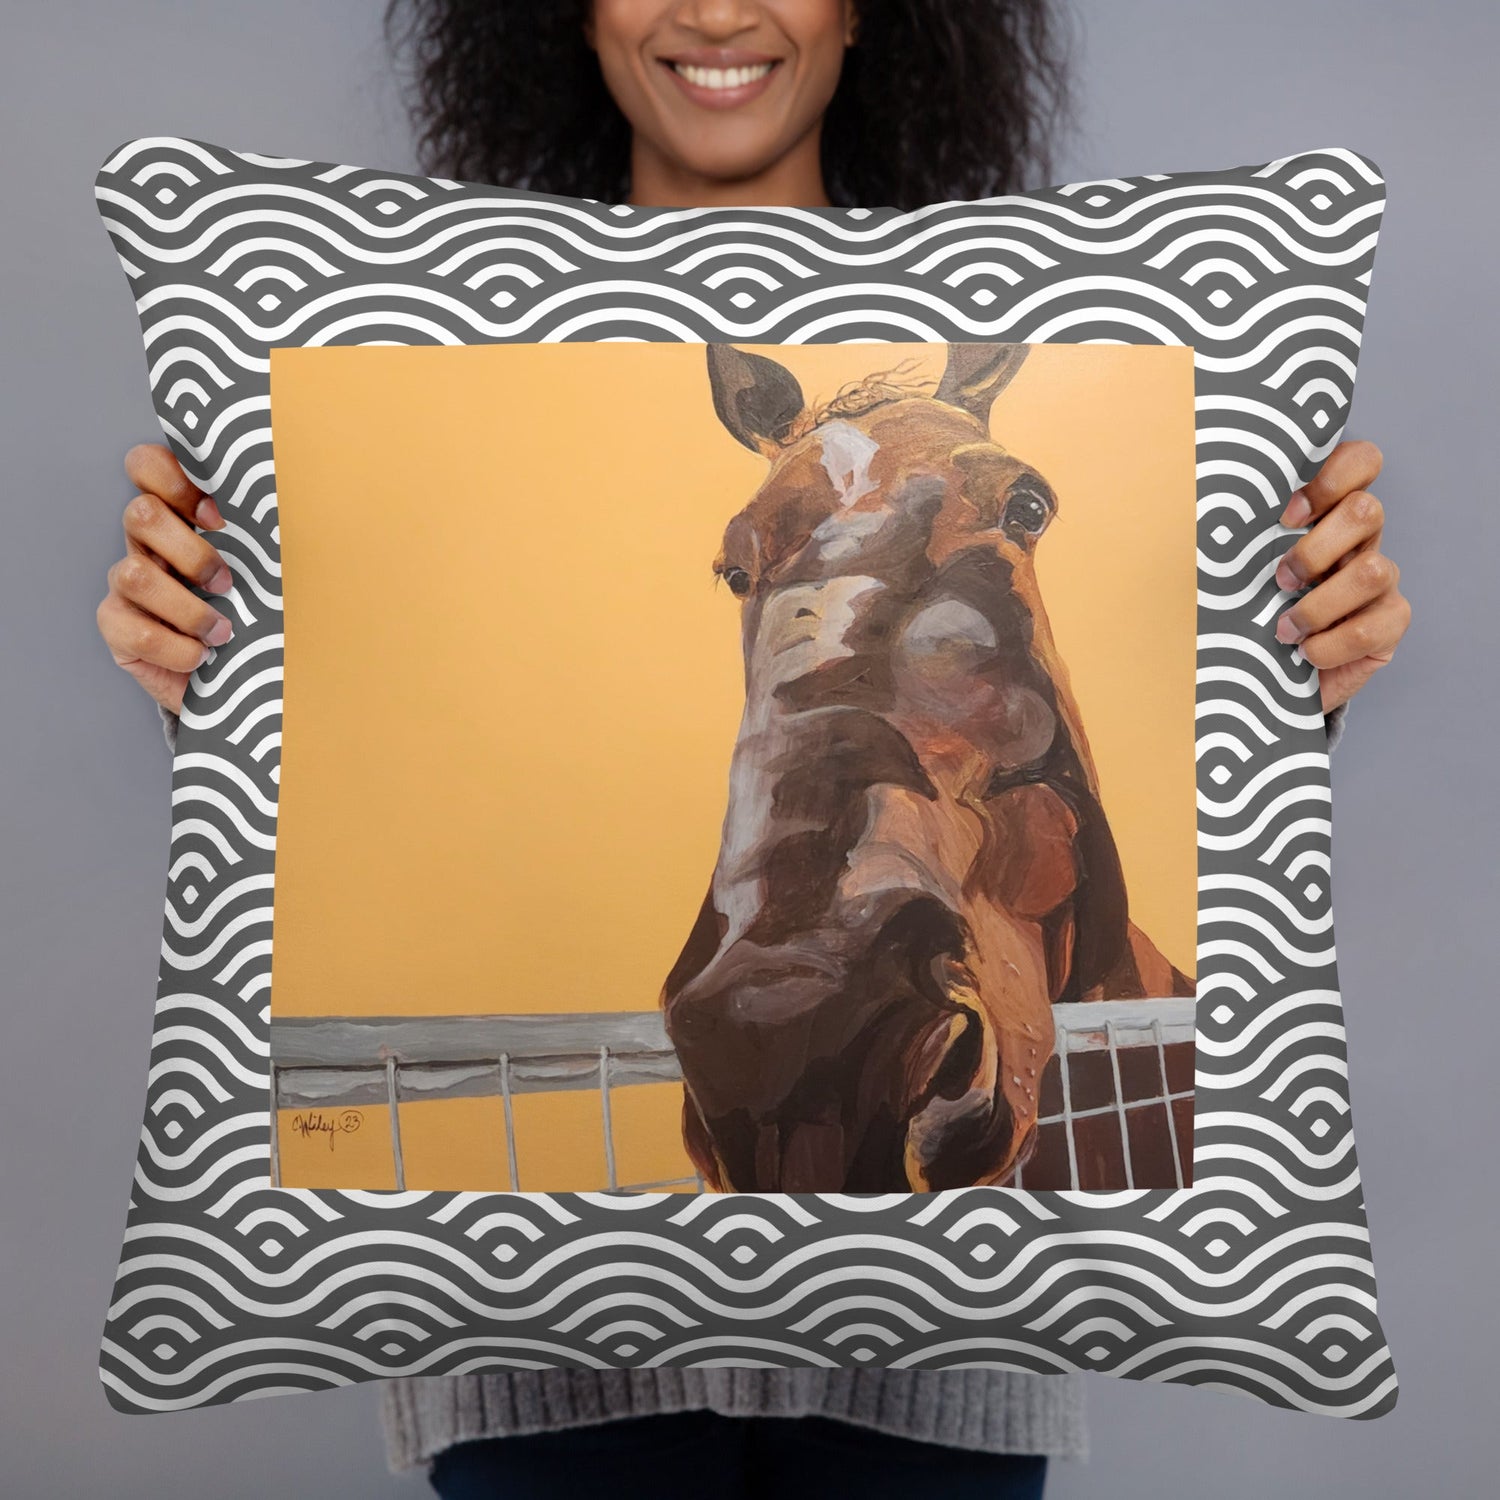 A woman holding a pillow with a brown horse on an orange background, framed by black and white wavy pattern.